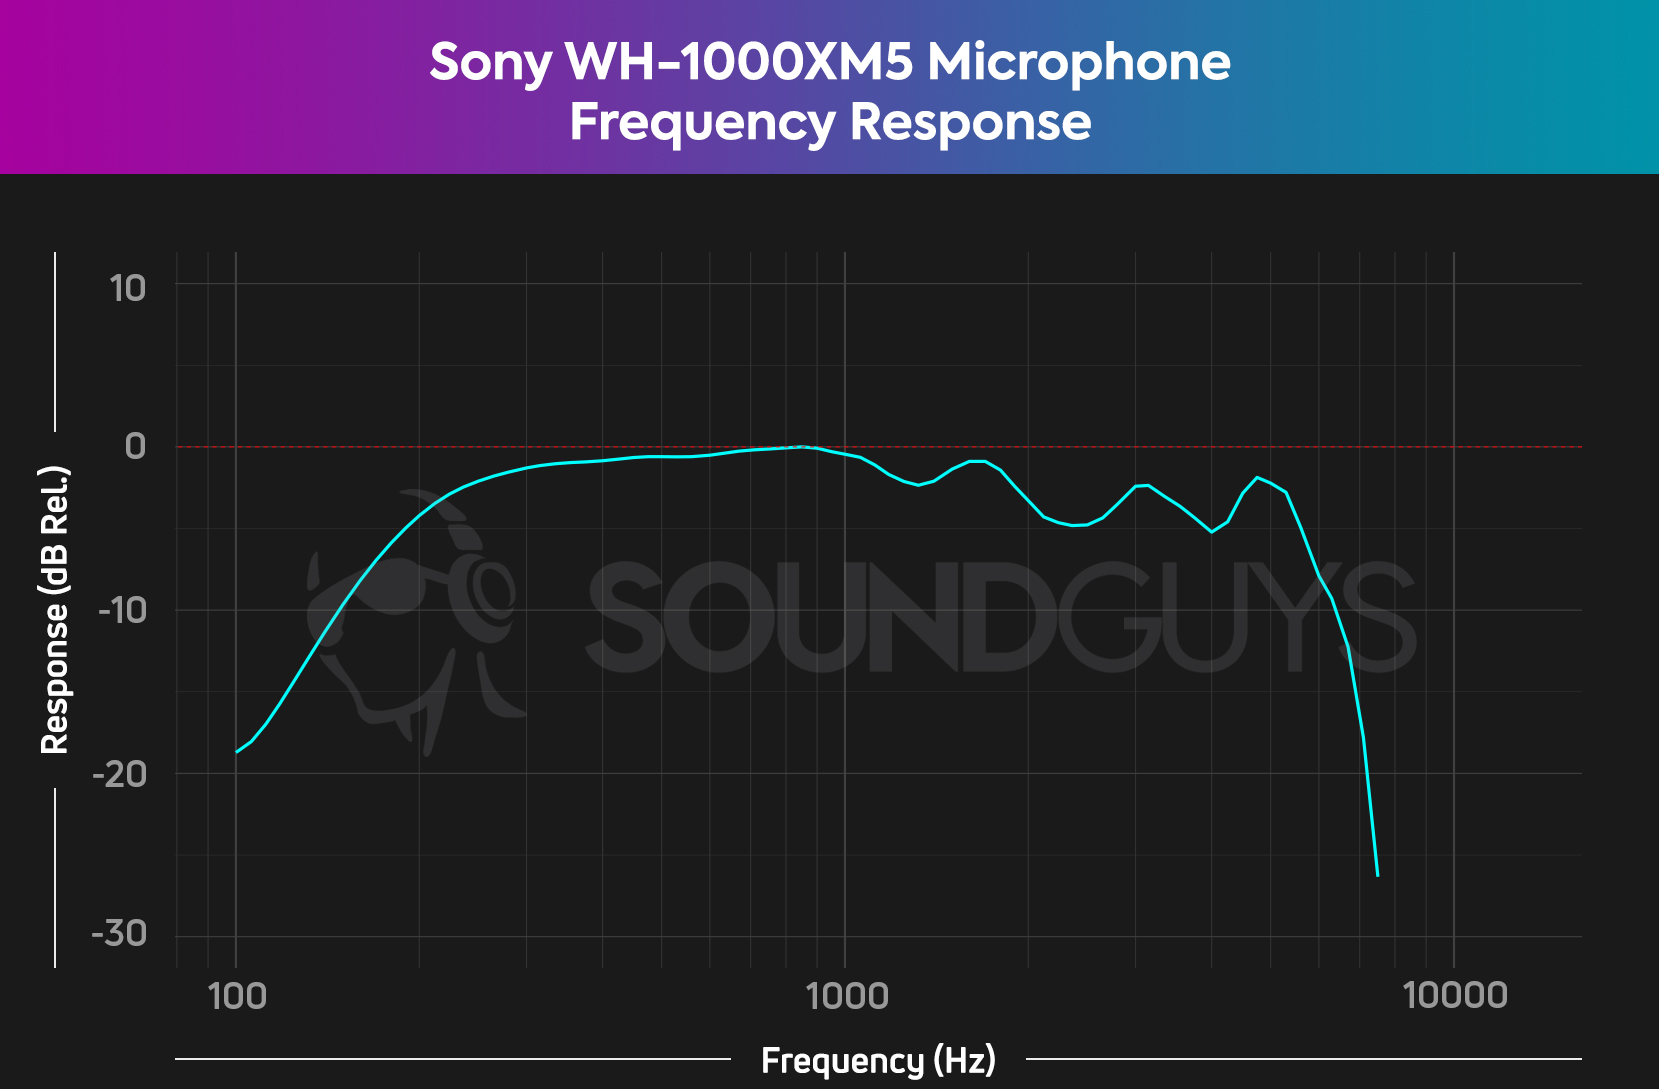 The Sony WH-1000XM5 attenuates sound above 6kHz, which is fine for voice data.